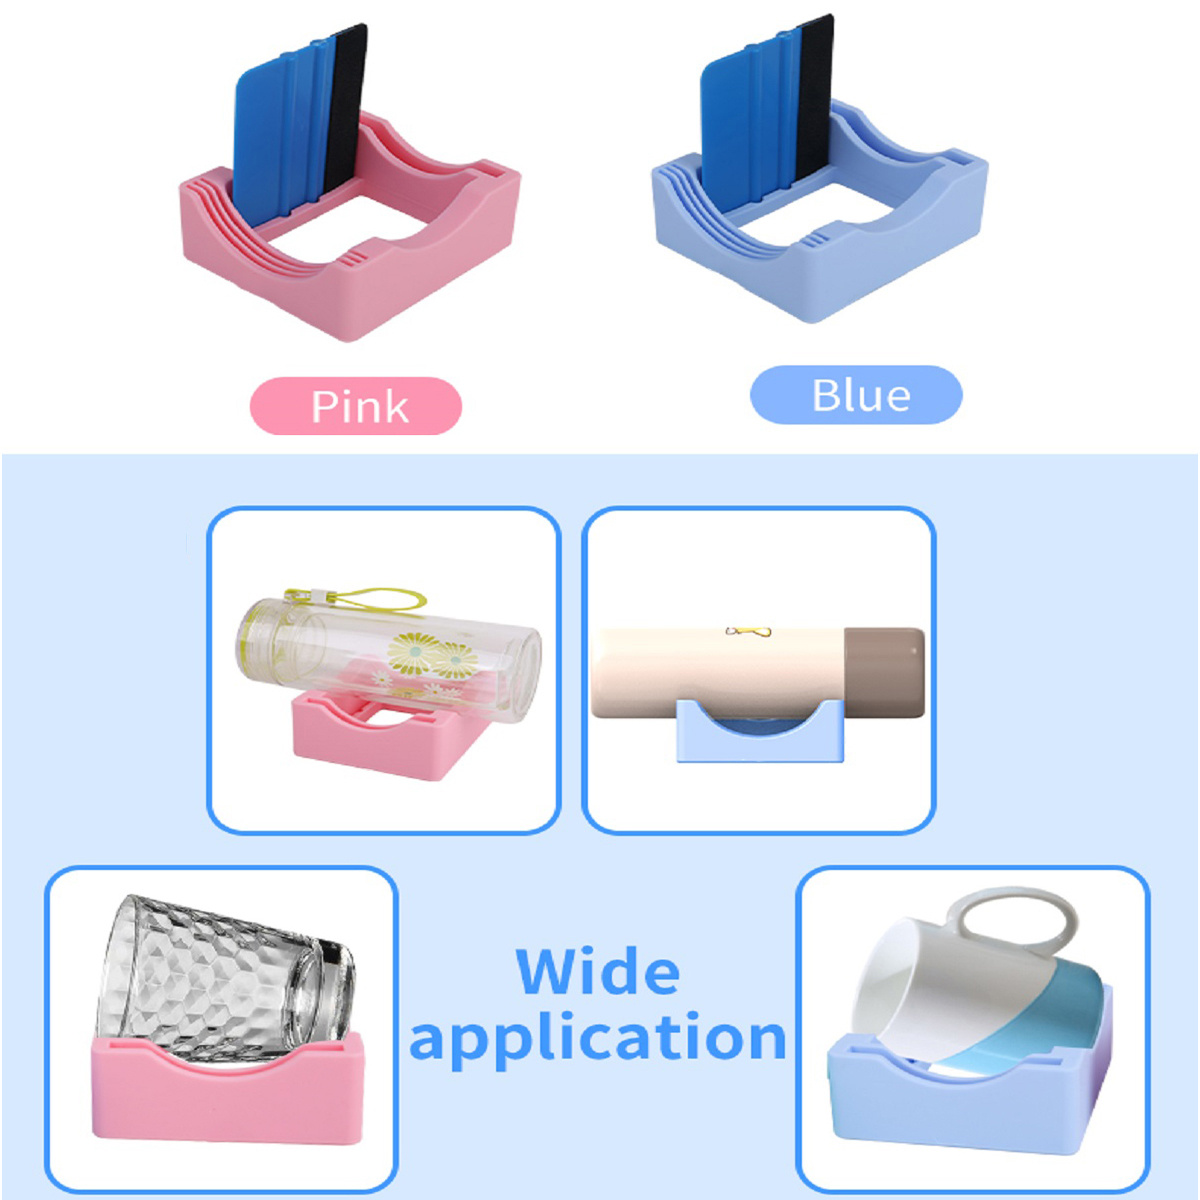 Silicone Cup Cradle for Tumblers with Built-In Slot, Tumbler